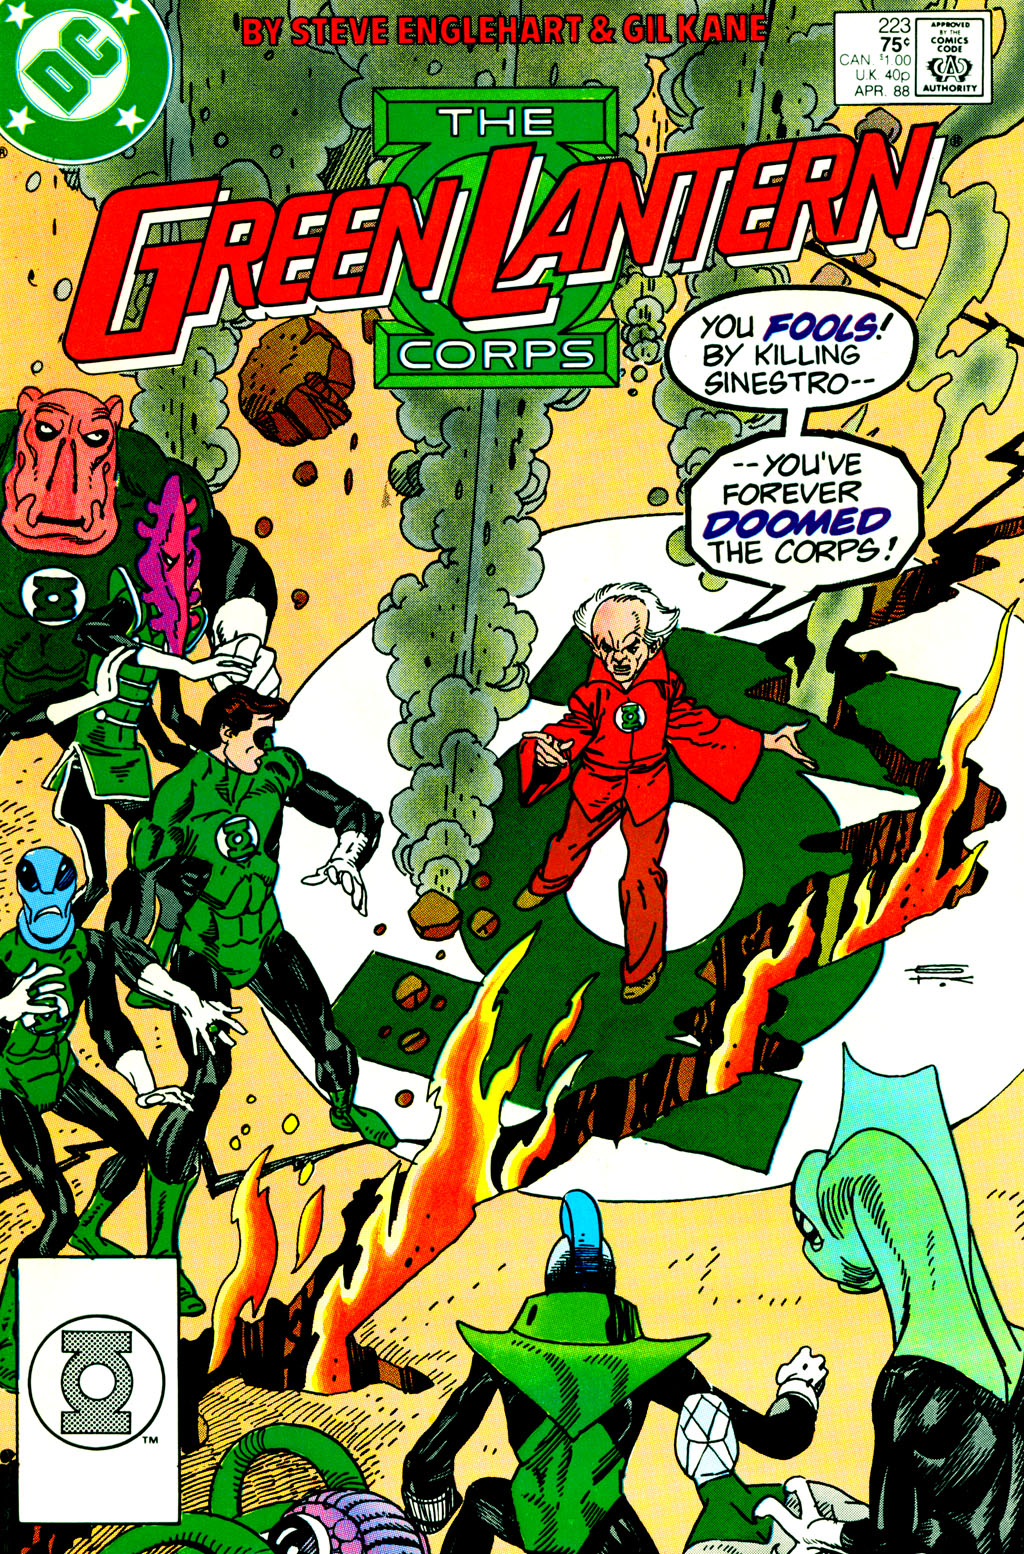 Read online The Green Lantern Corps comic -  Issue #223 - 1